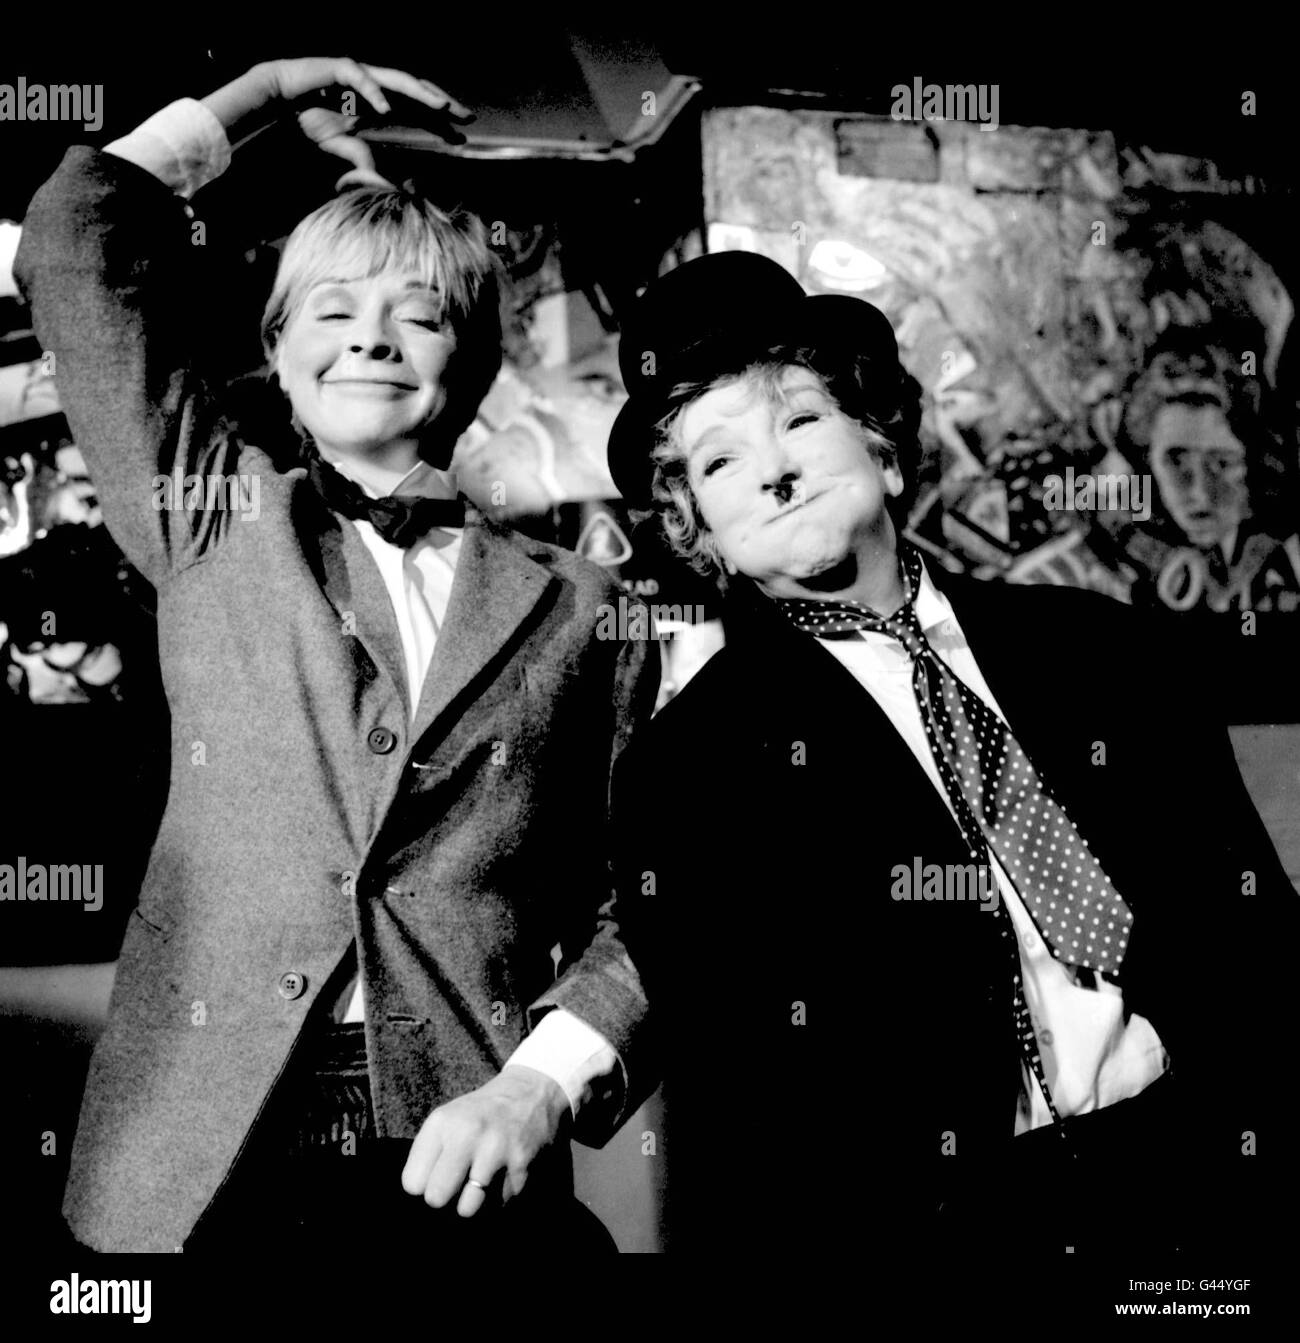 The female Laurel and Hardy are British actresses Susannah York (left) and Beryl Reid. They ar doing a take-off of the old-time comics for a fancy dress scene in the film version of Frank Marcus's play 'The Killing of Sister George'. Stock Photo